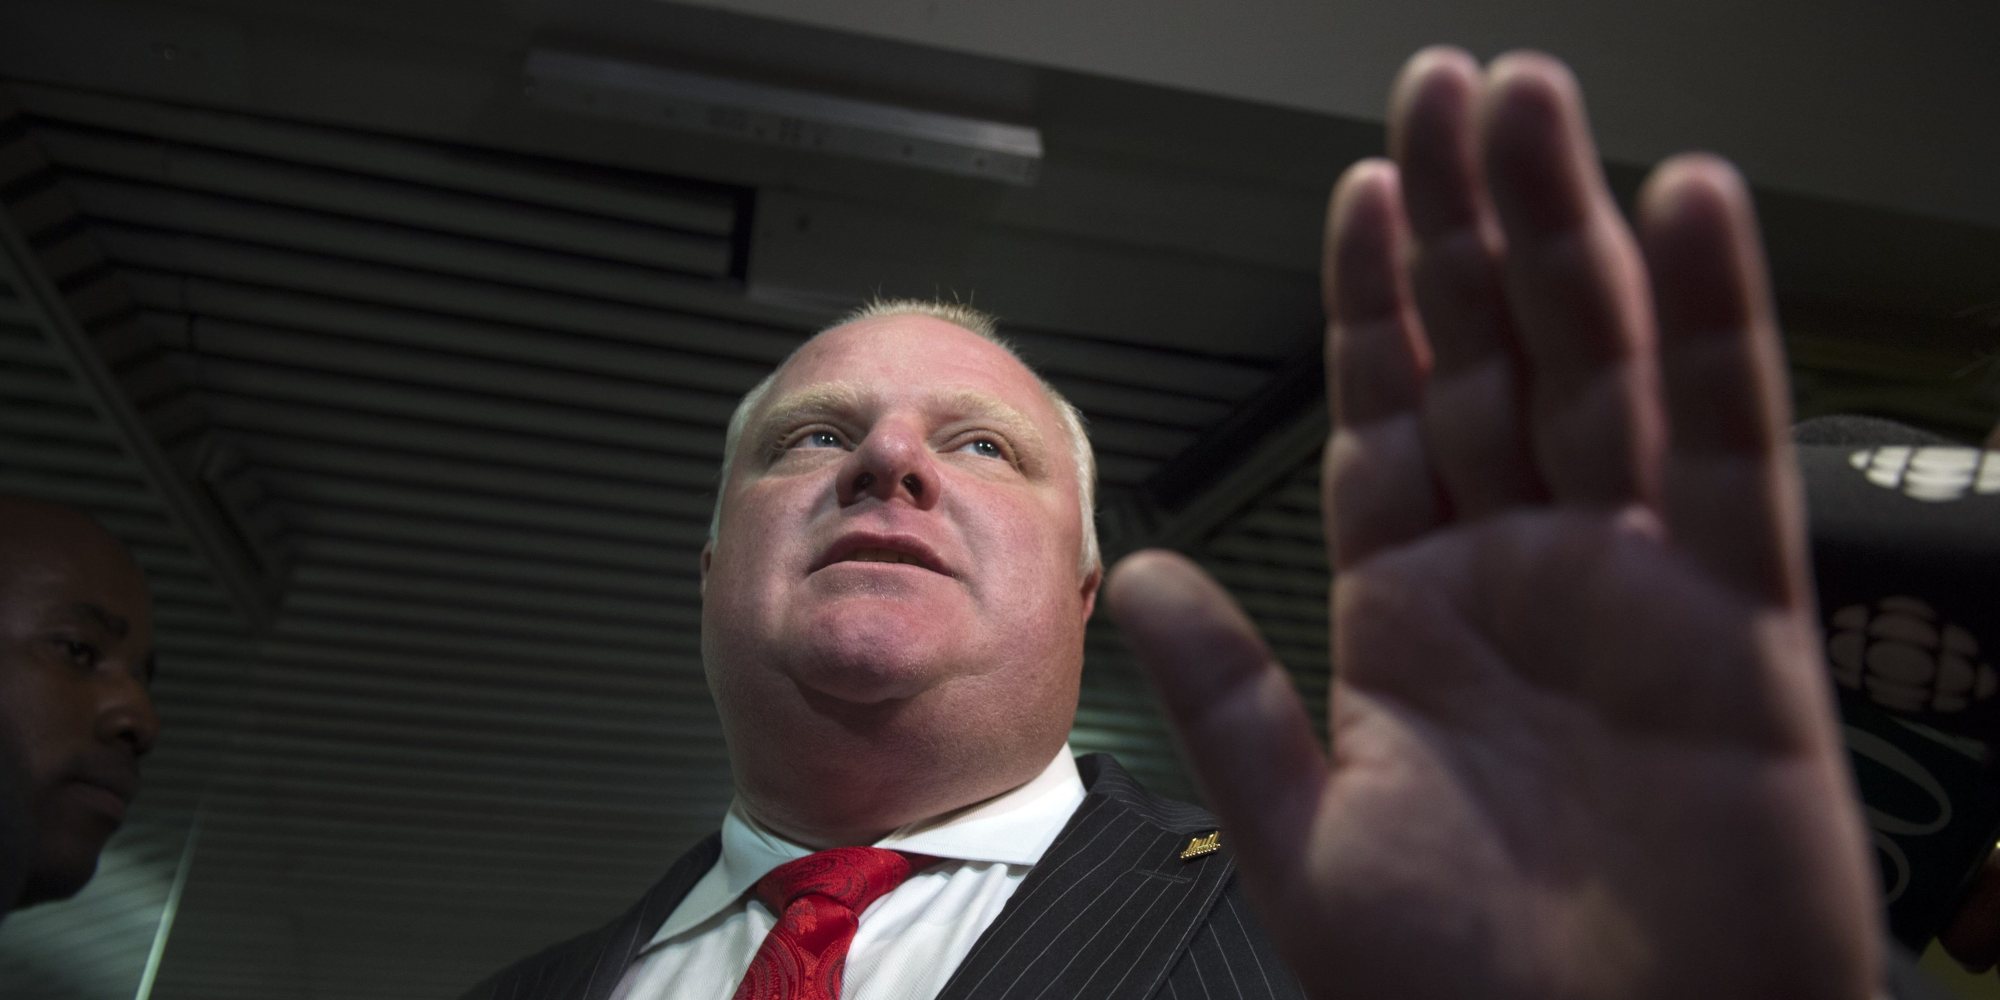 Rob ford video threat #9